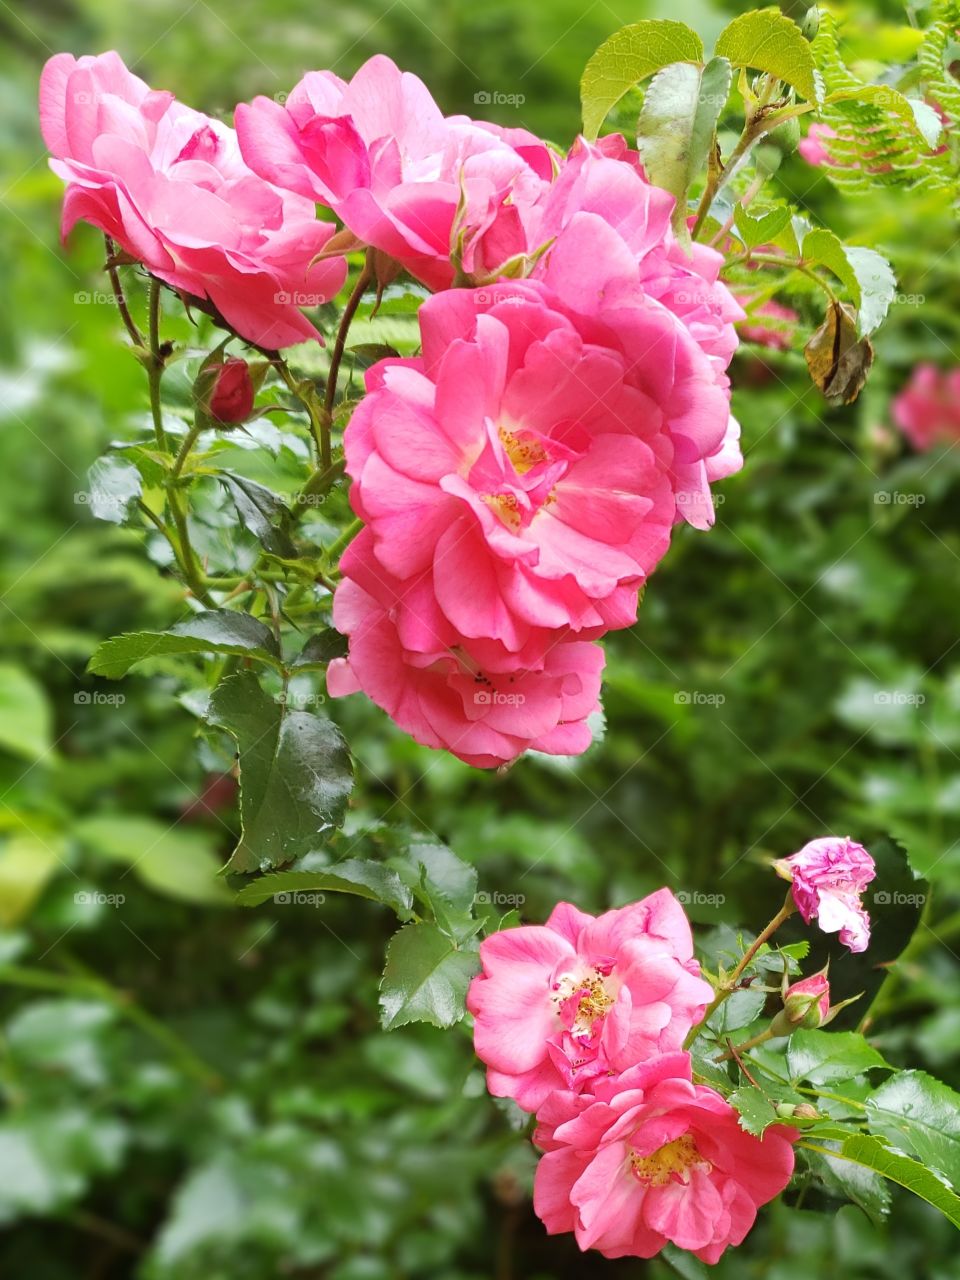 pink rose blooms on a background of green leaves